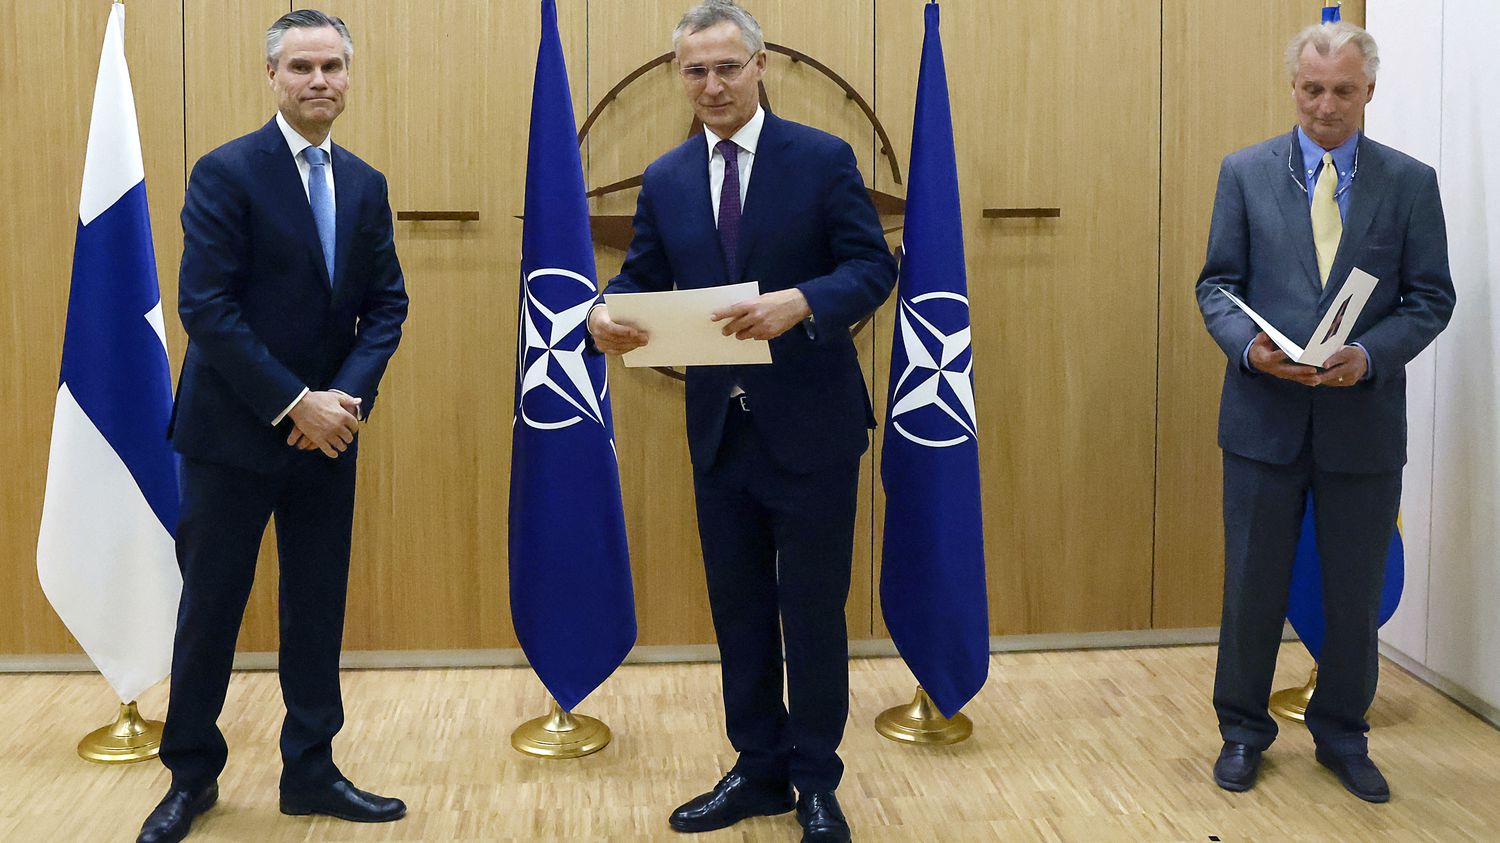 War in Ukraine: Finland and Sweden officially submit their applications for NATO membership
